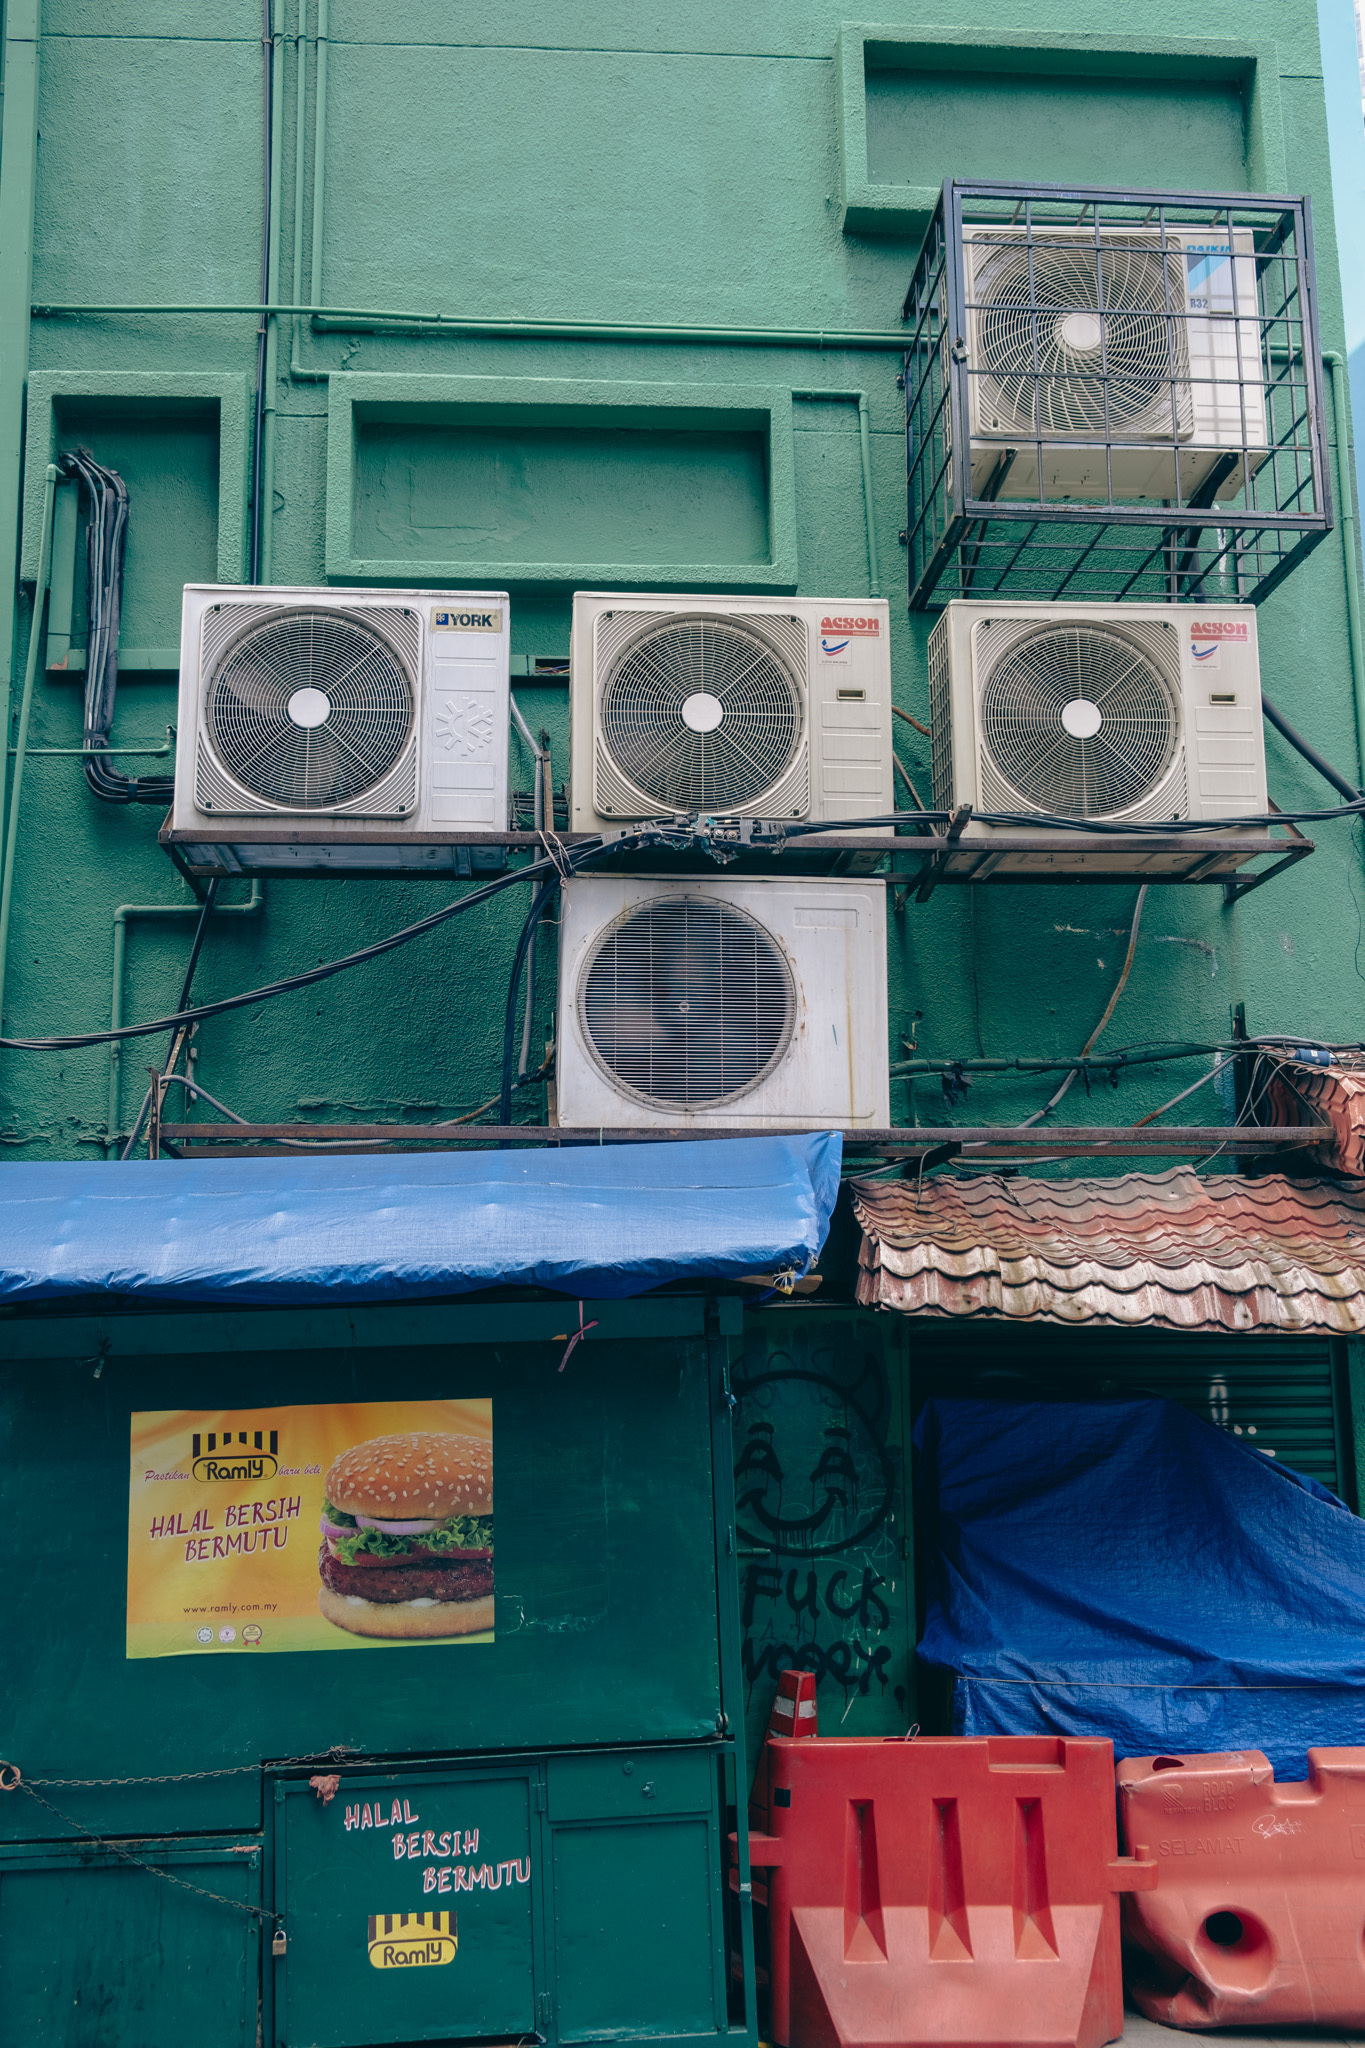 An image of air condiction fans outside a restaurant building in KL, Malaysia. White fans in front of a green wall, a little bit of posters and construction material on the lower part of the image